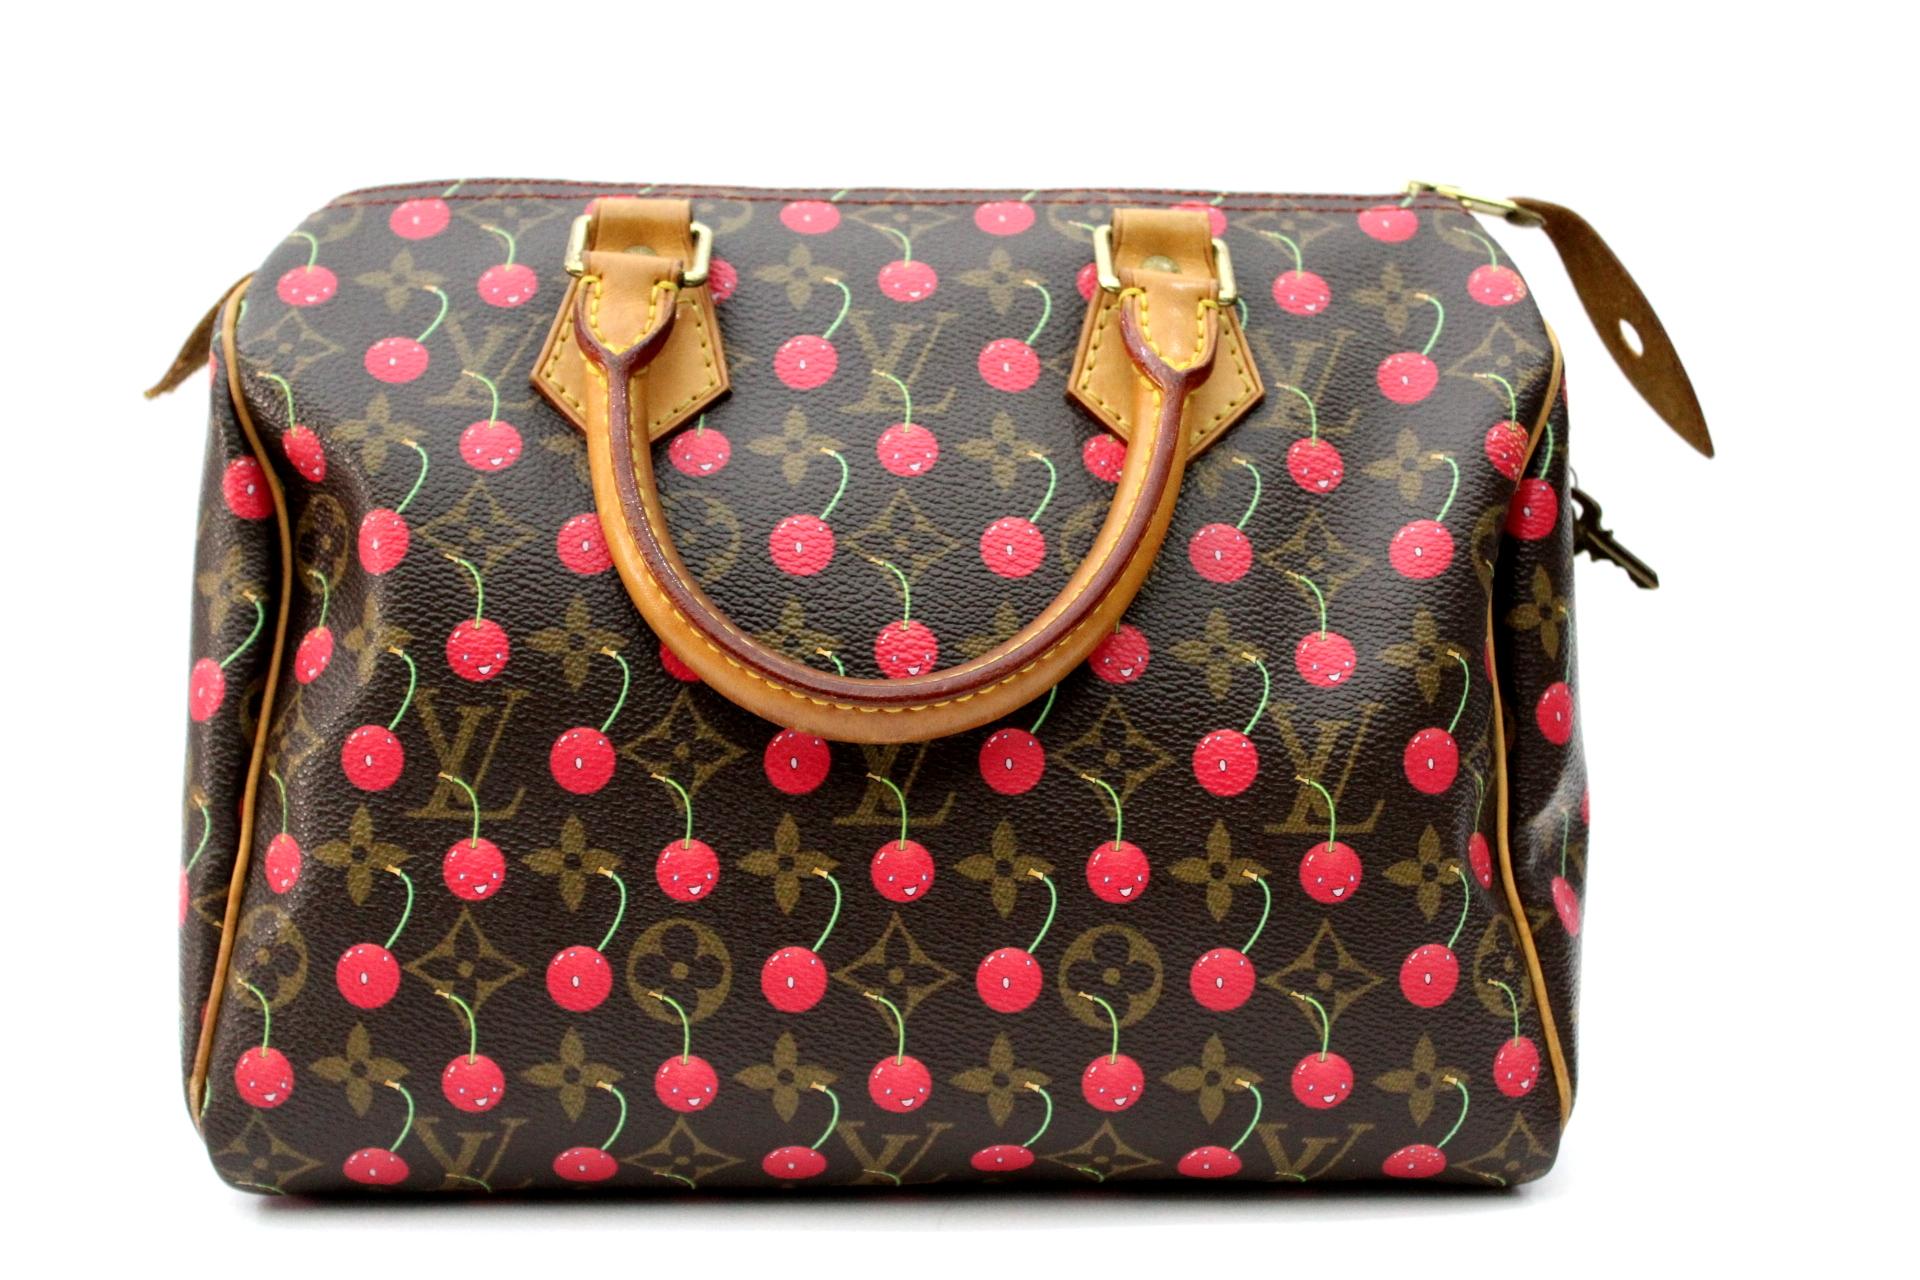 Don't miss out on your opportunity to own this rare and highly sought after Louis Vuitton Limited Edition Cerises Speedy 25 Bag. This popular Speedy 25 style has the iconic monogram canvas adorned with bright cheerful cherries. A definite fave for